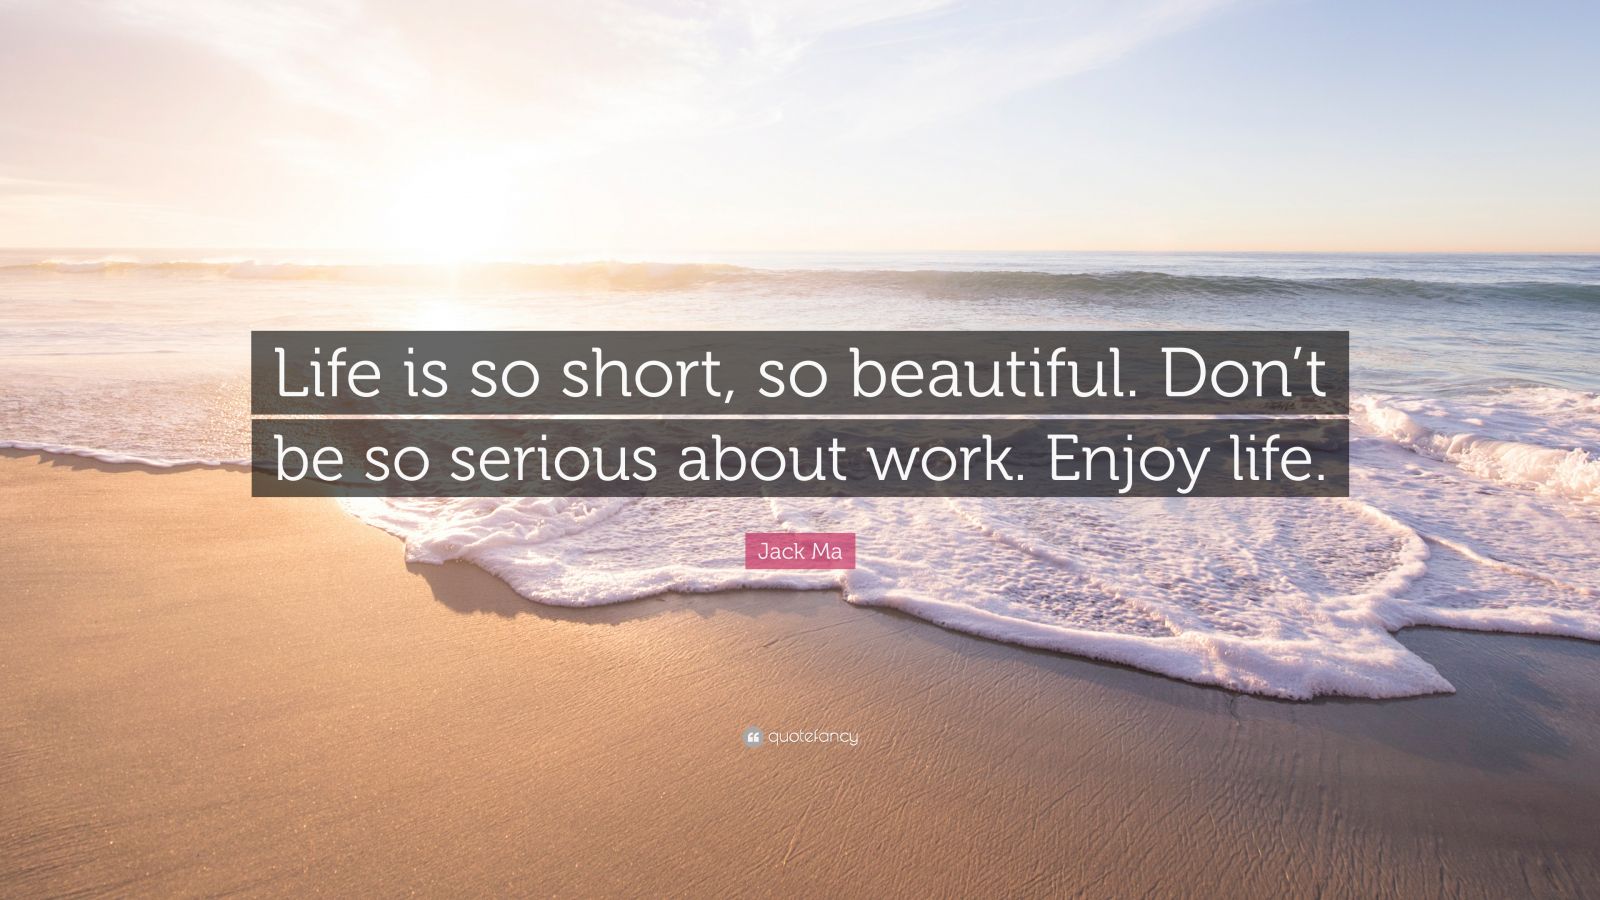 Jack Ma Quote “Life is so short so beautiful Don t